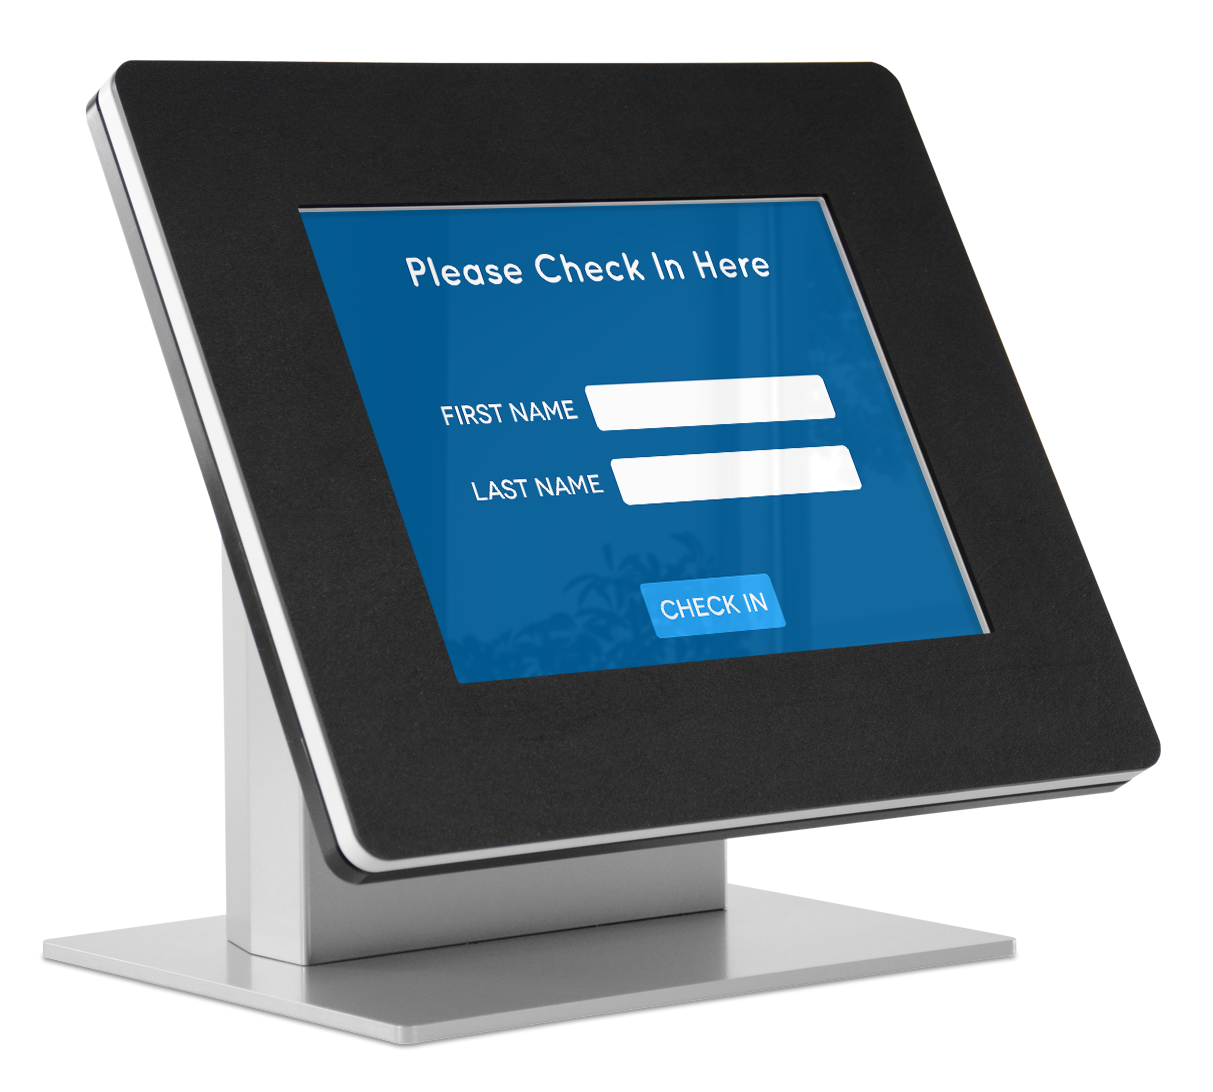 ipad check-in software